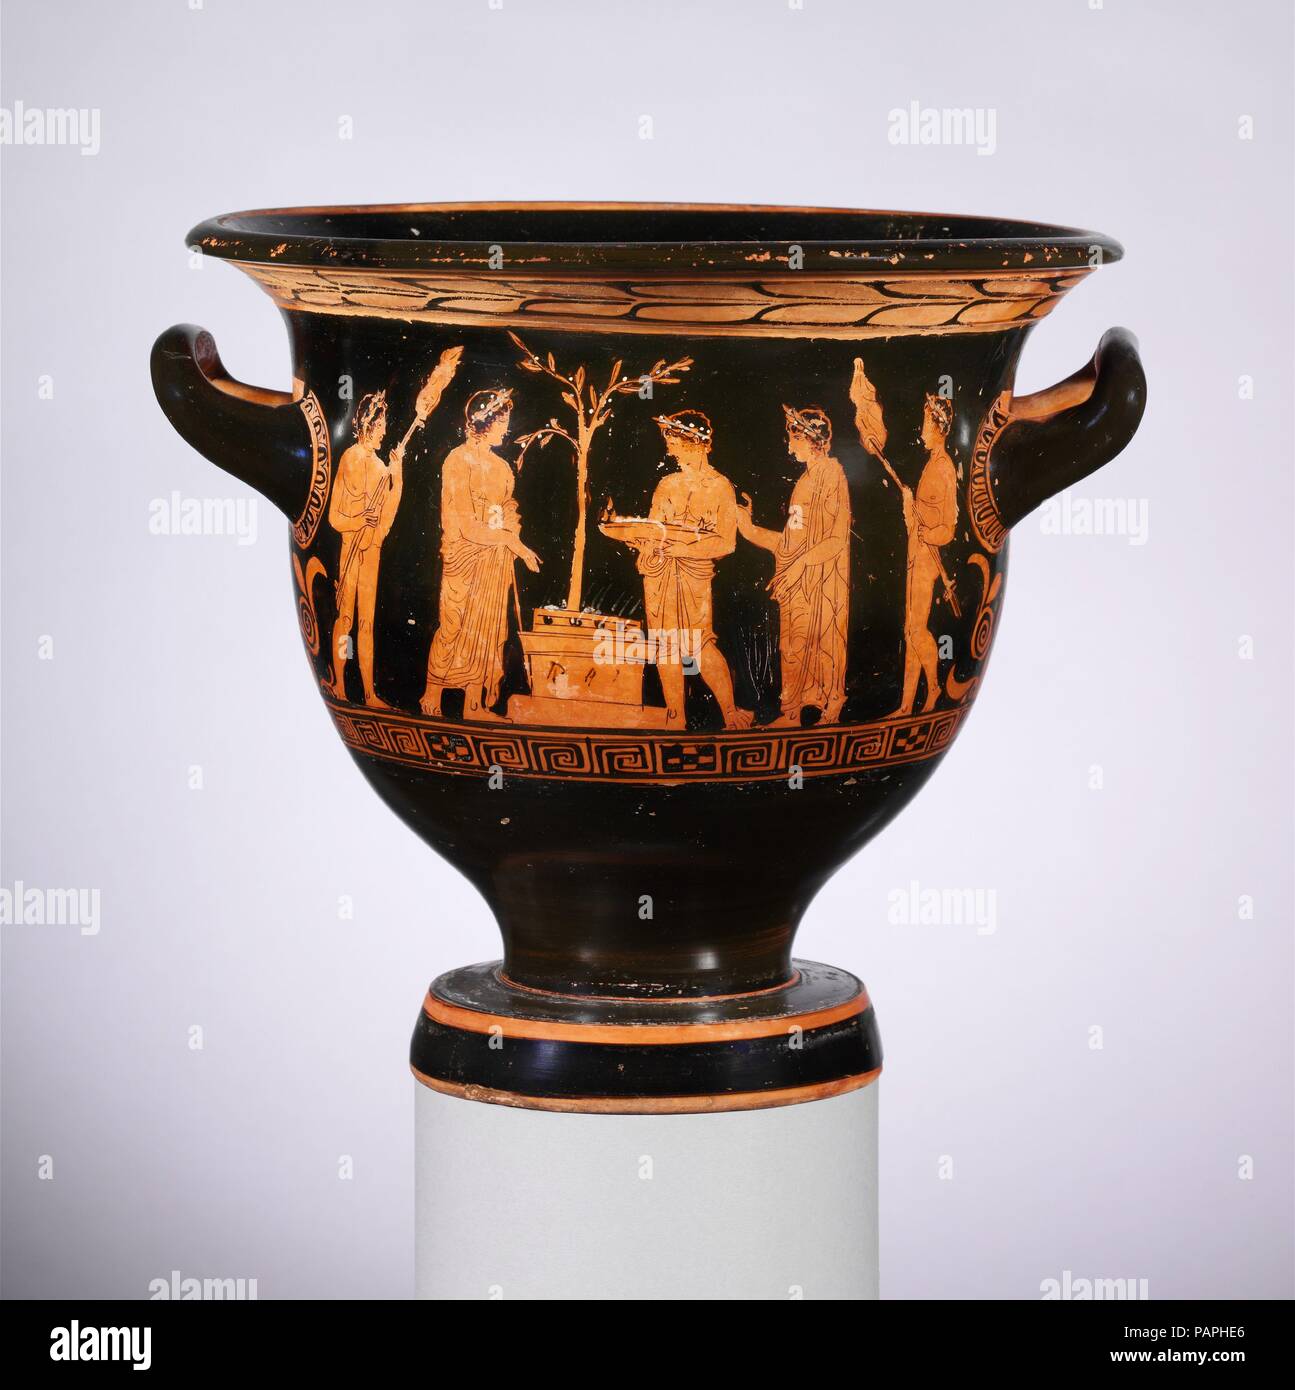 Terracotta bell-krater (bowl for mixing wine and water). Culture: Greek, Attic. Dimensions: H. 12 5/8 in. (32.1 cm)  diameter  13 3/8 in. (33.9 cm)  width with handles  14 5/16 in. (36.3 cm). Date: late 5th century B.C..  Obverse, sacrifice at an altar  Reverse,  three youths  The altar is stacked with wood to burn the meat offering, prepared on skewers and being carried by attendants on either side. The other two attendants carry a tray and a basket. The recipient of the sacrifice is not identified. The laurel tree behind the altar might indicate Apollo. Museum: Metropolitan Museum of Art, Ne Stock Photo